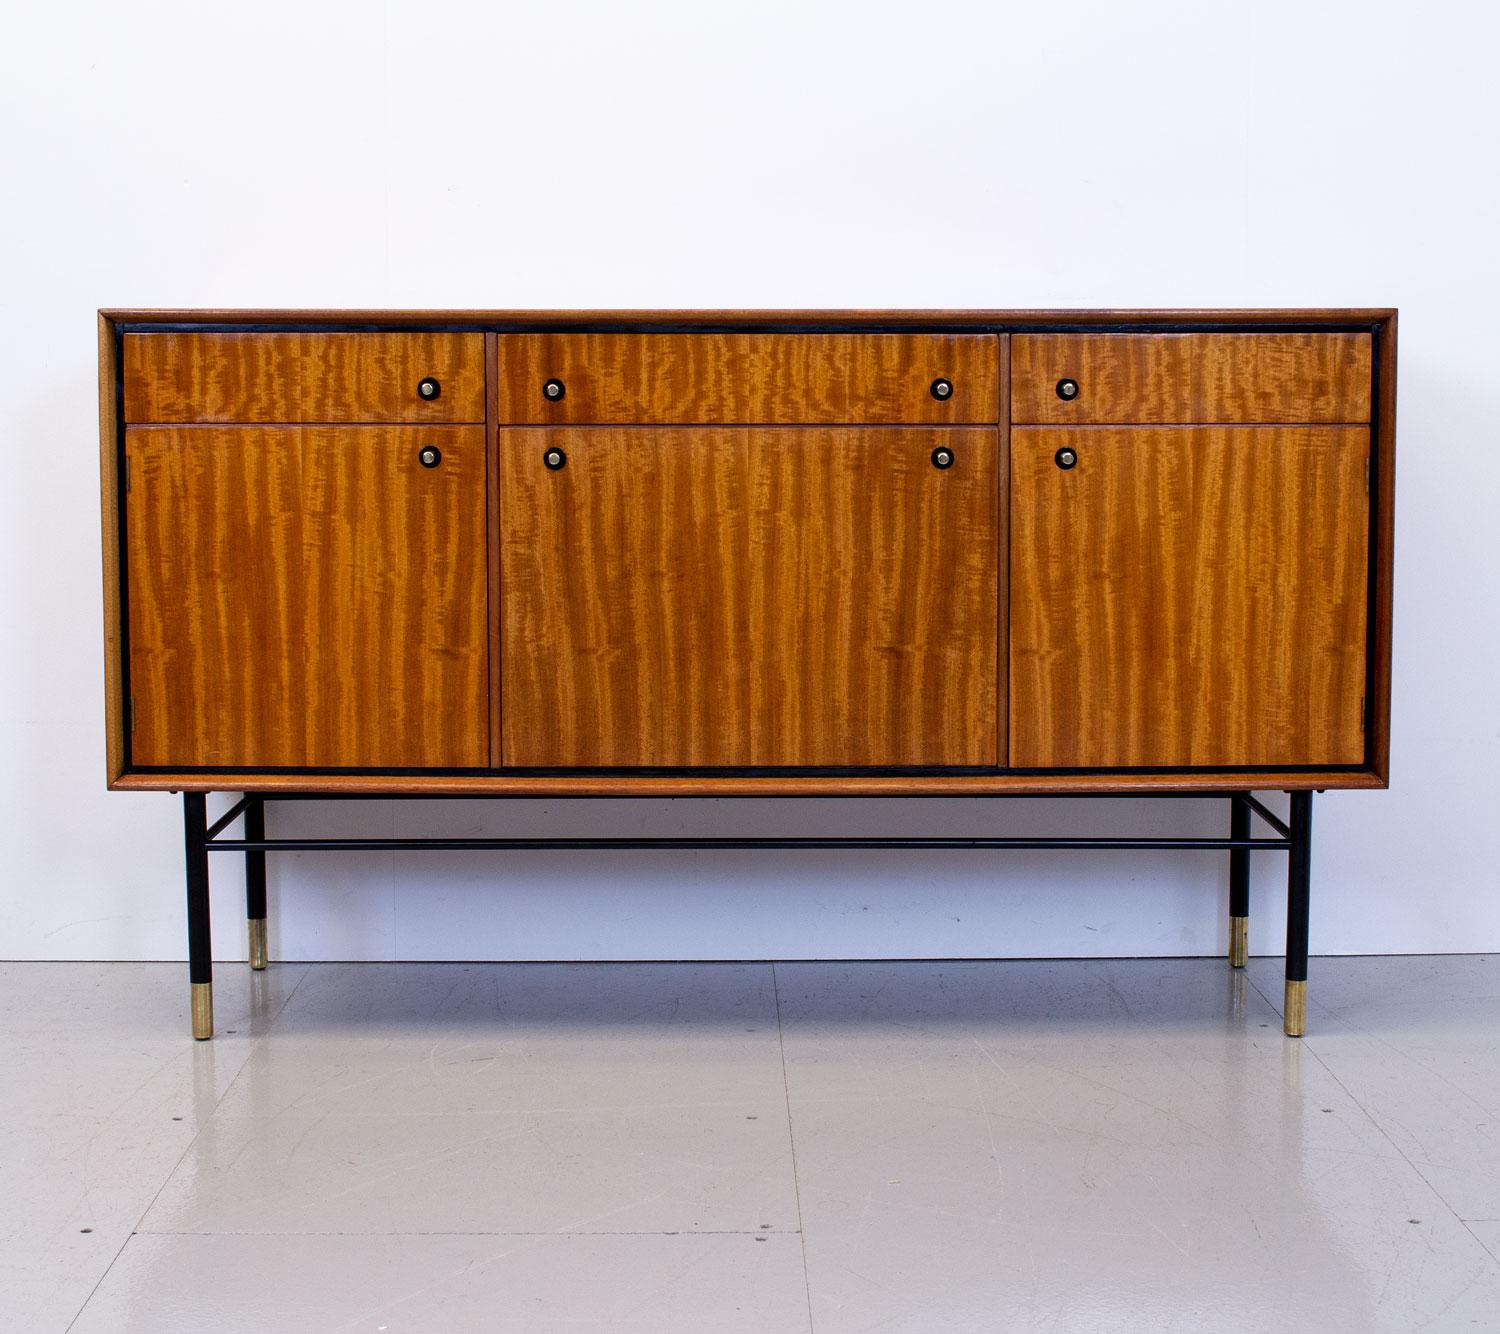 1950s tola and mahogany sideboard by Heals of London. It has 3 drawers, one baize lined for cutlery, 2 cupboards with removable shelves and a drinks cabinet with Formica lined door all on black painted steel legs with brass ferrules and handles.